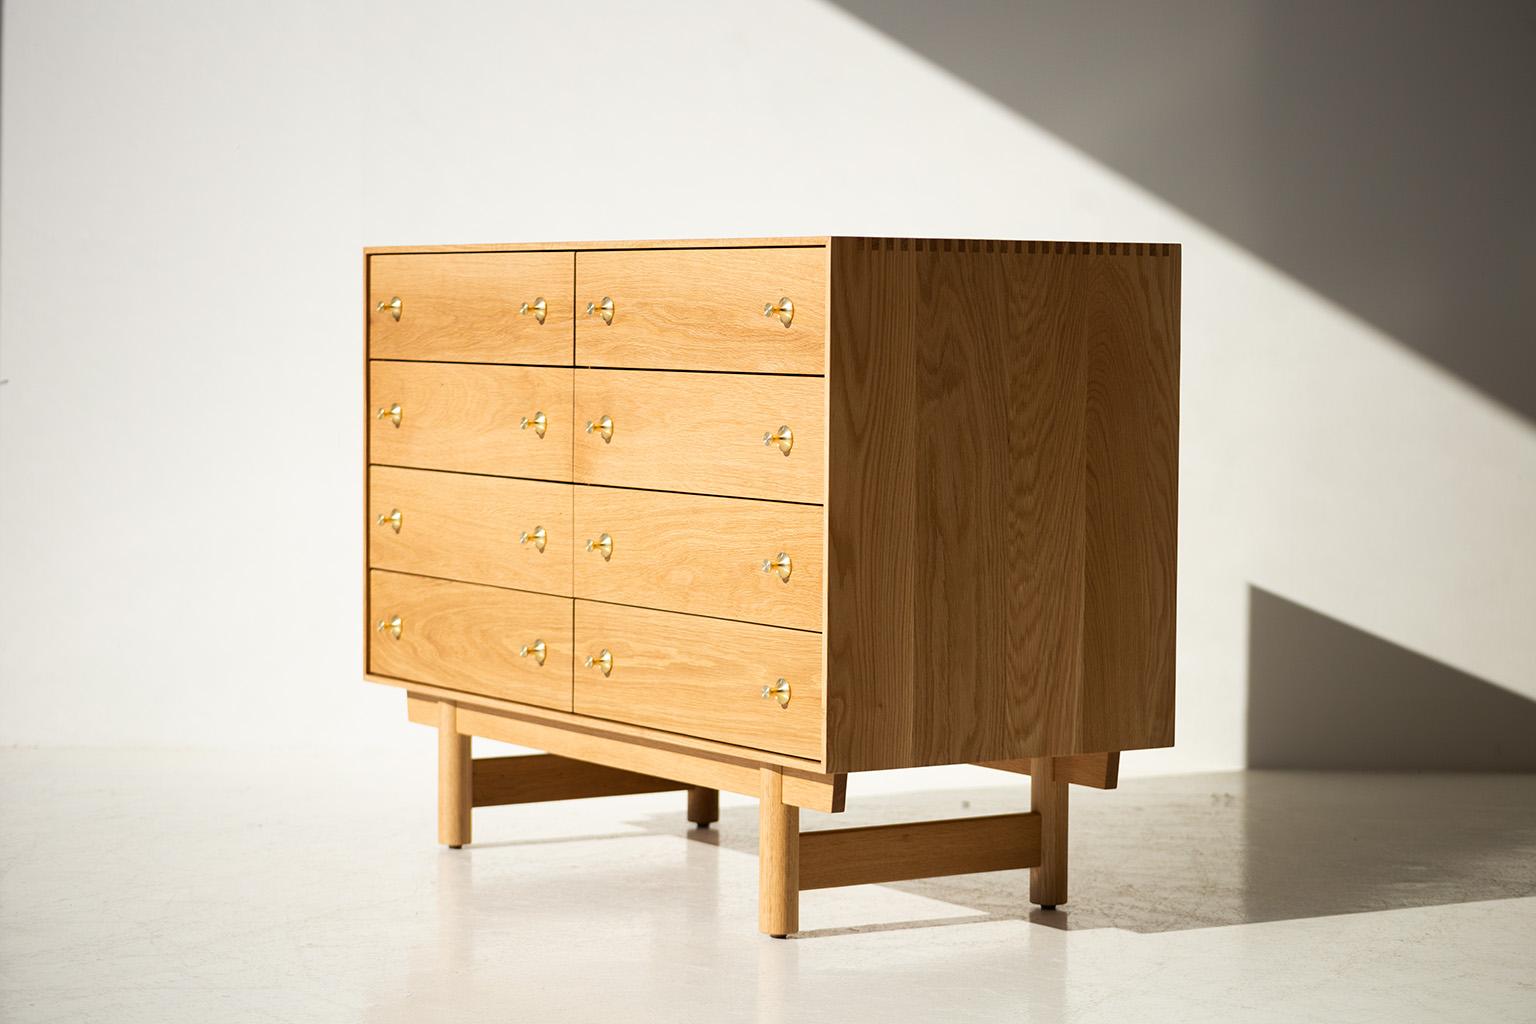 Lawrence peabody oak dresser - 2201P : The Peabody Collection 

This Lawrence Peabody Oak dresser for Craft Associates Furniture is expertly hand crafted. The Peabody collection pieces are licensed reintroductions for Craft Associates®. This